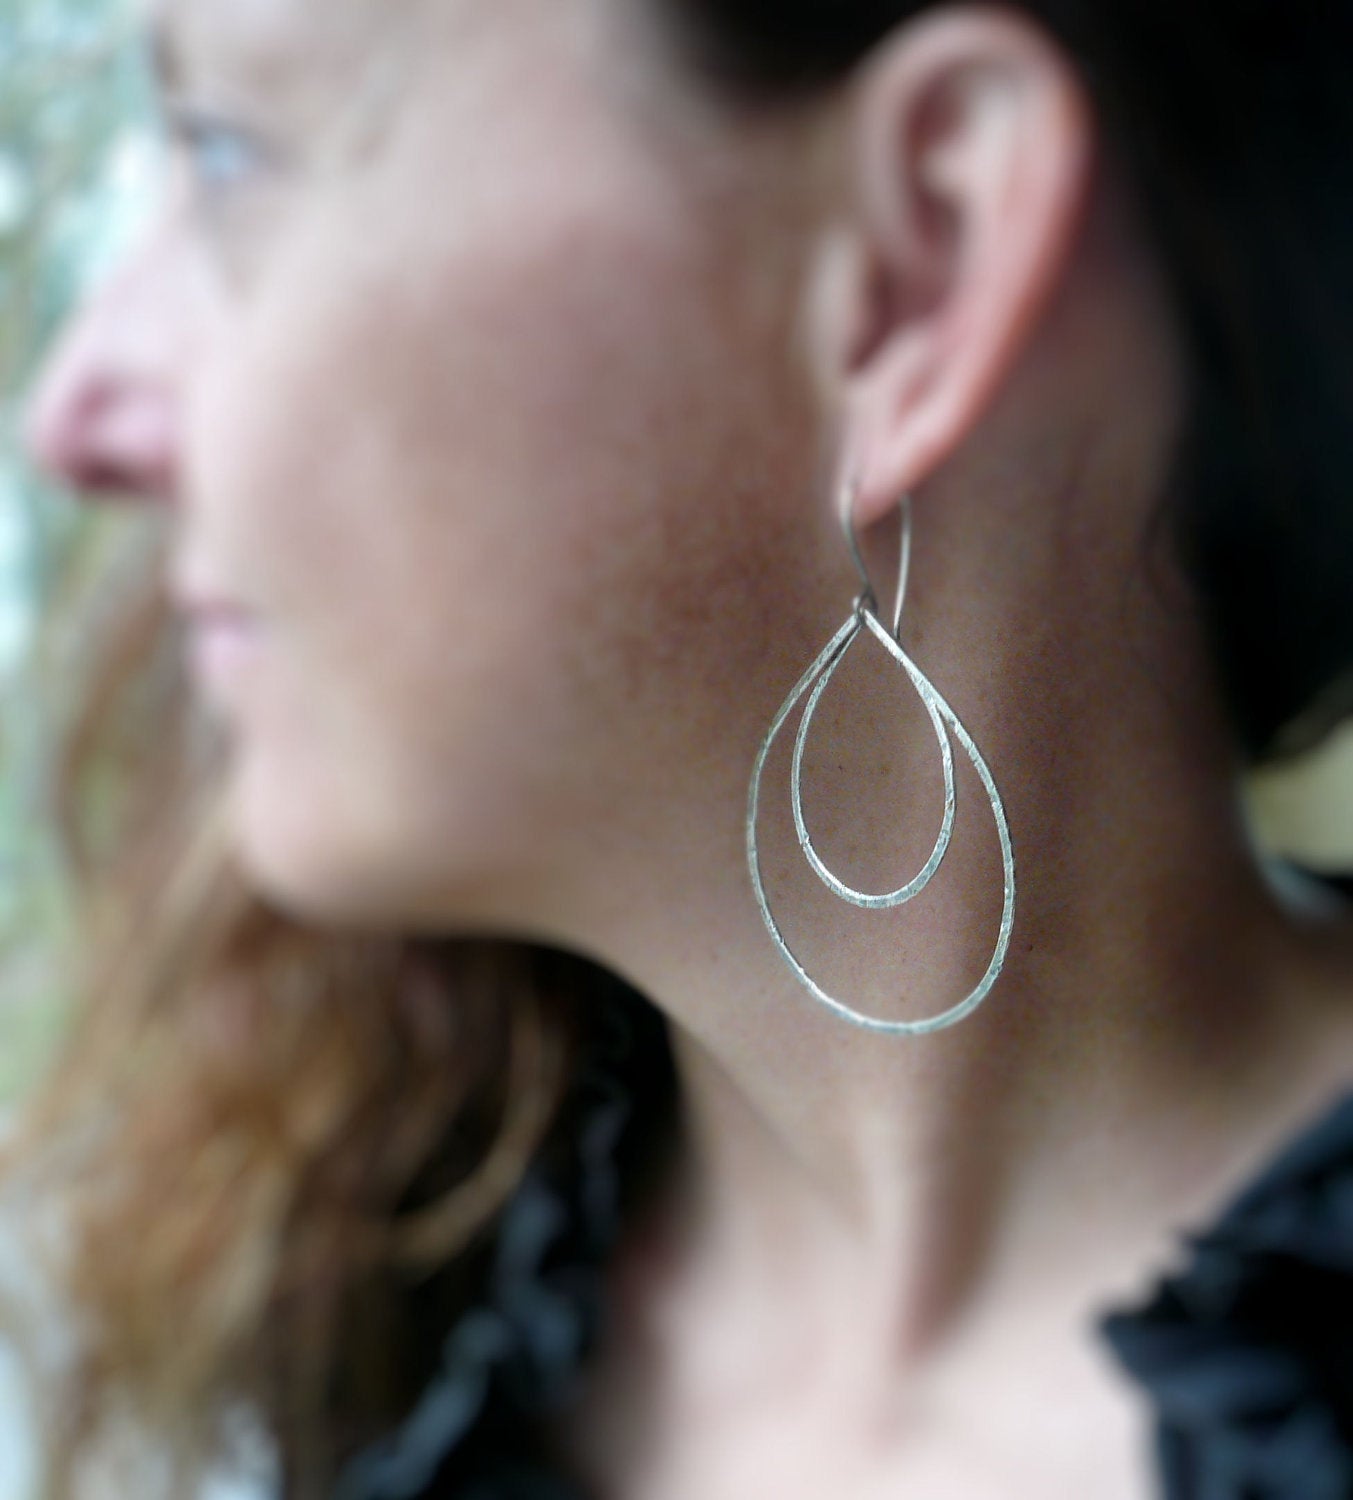 Duo of Tattered Tears - Handmade. Oxidized, textured sterling silver Earrings